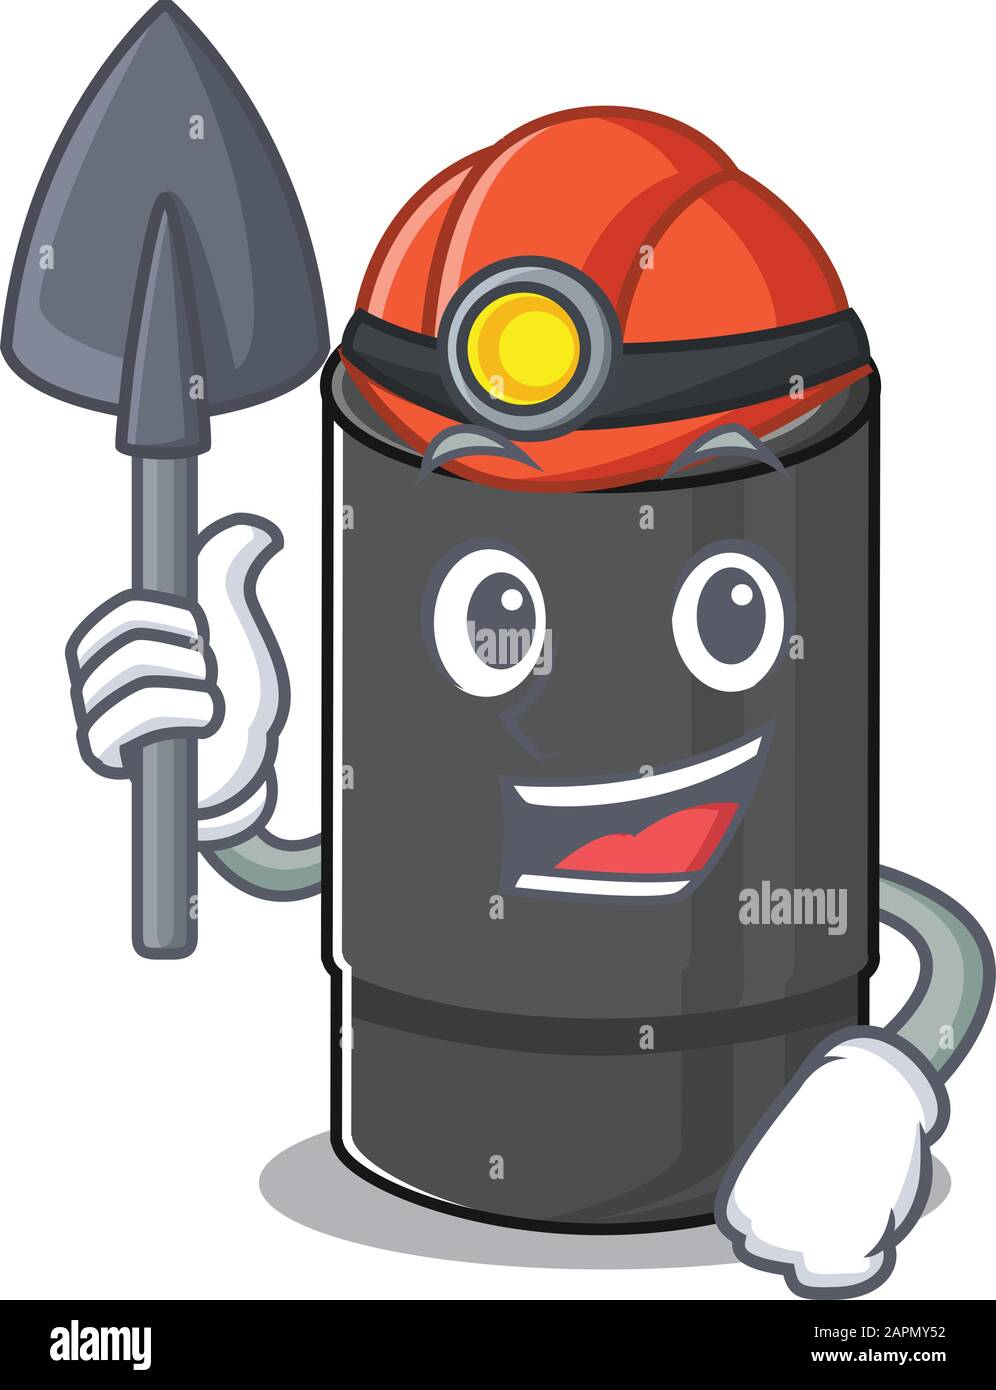 Cool clever Miner oil filter cartoon character design Stock Vector ...